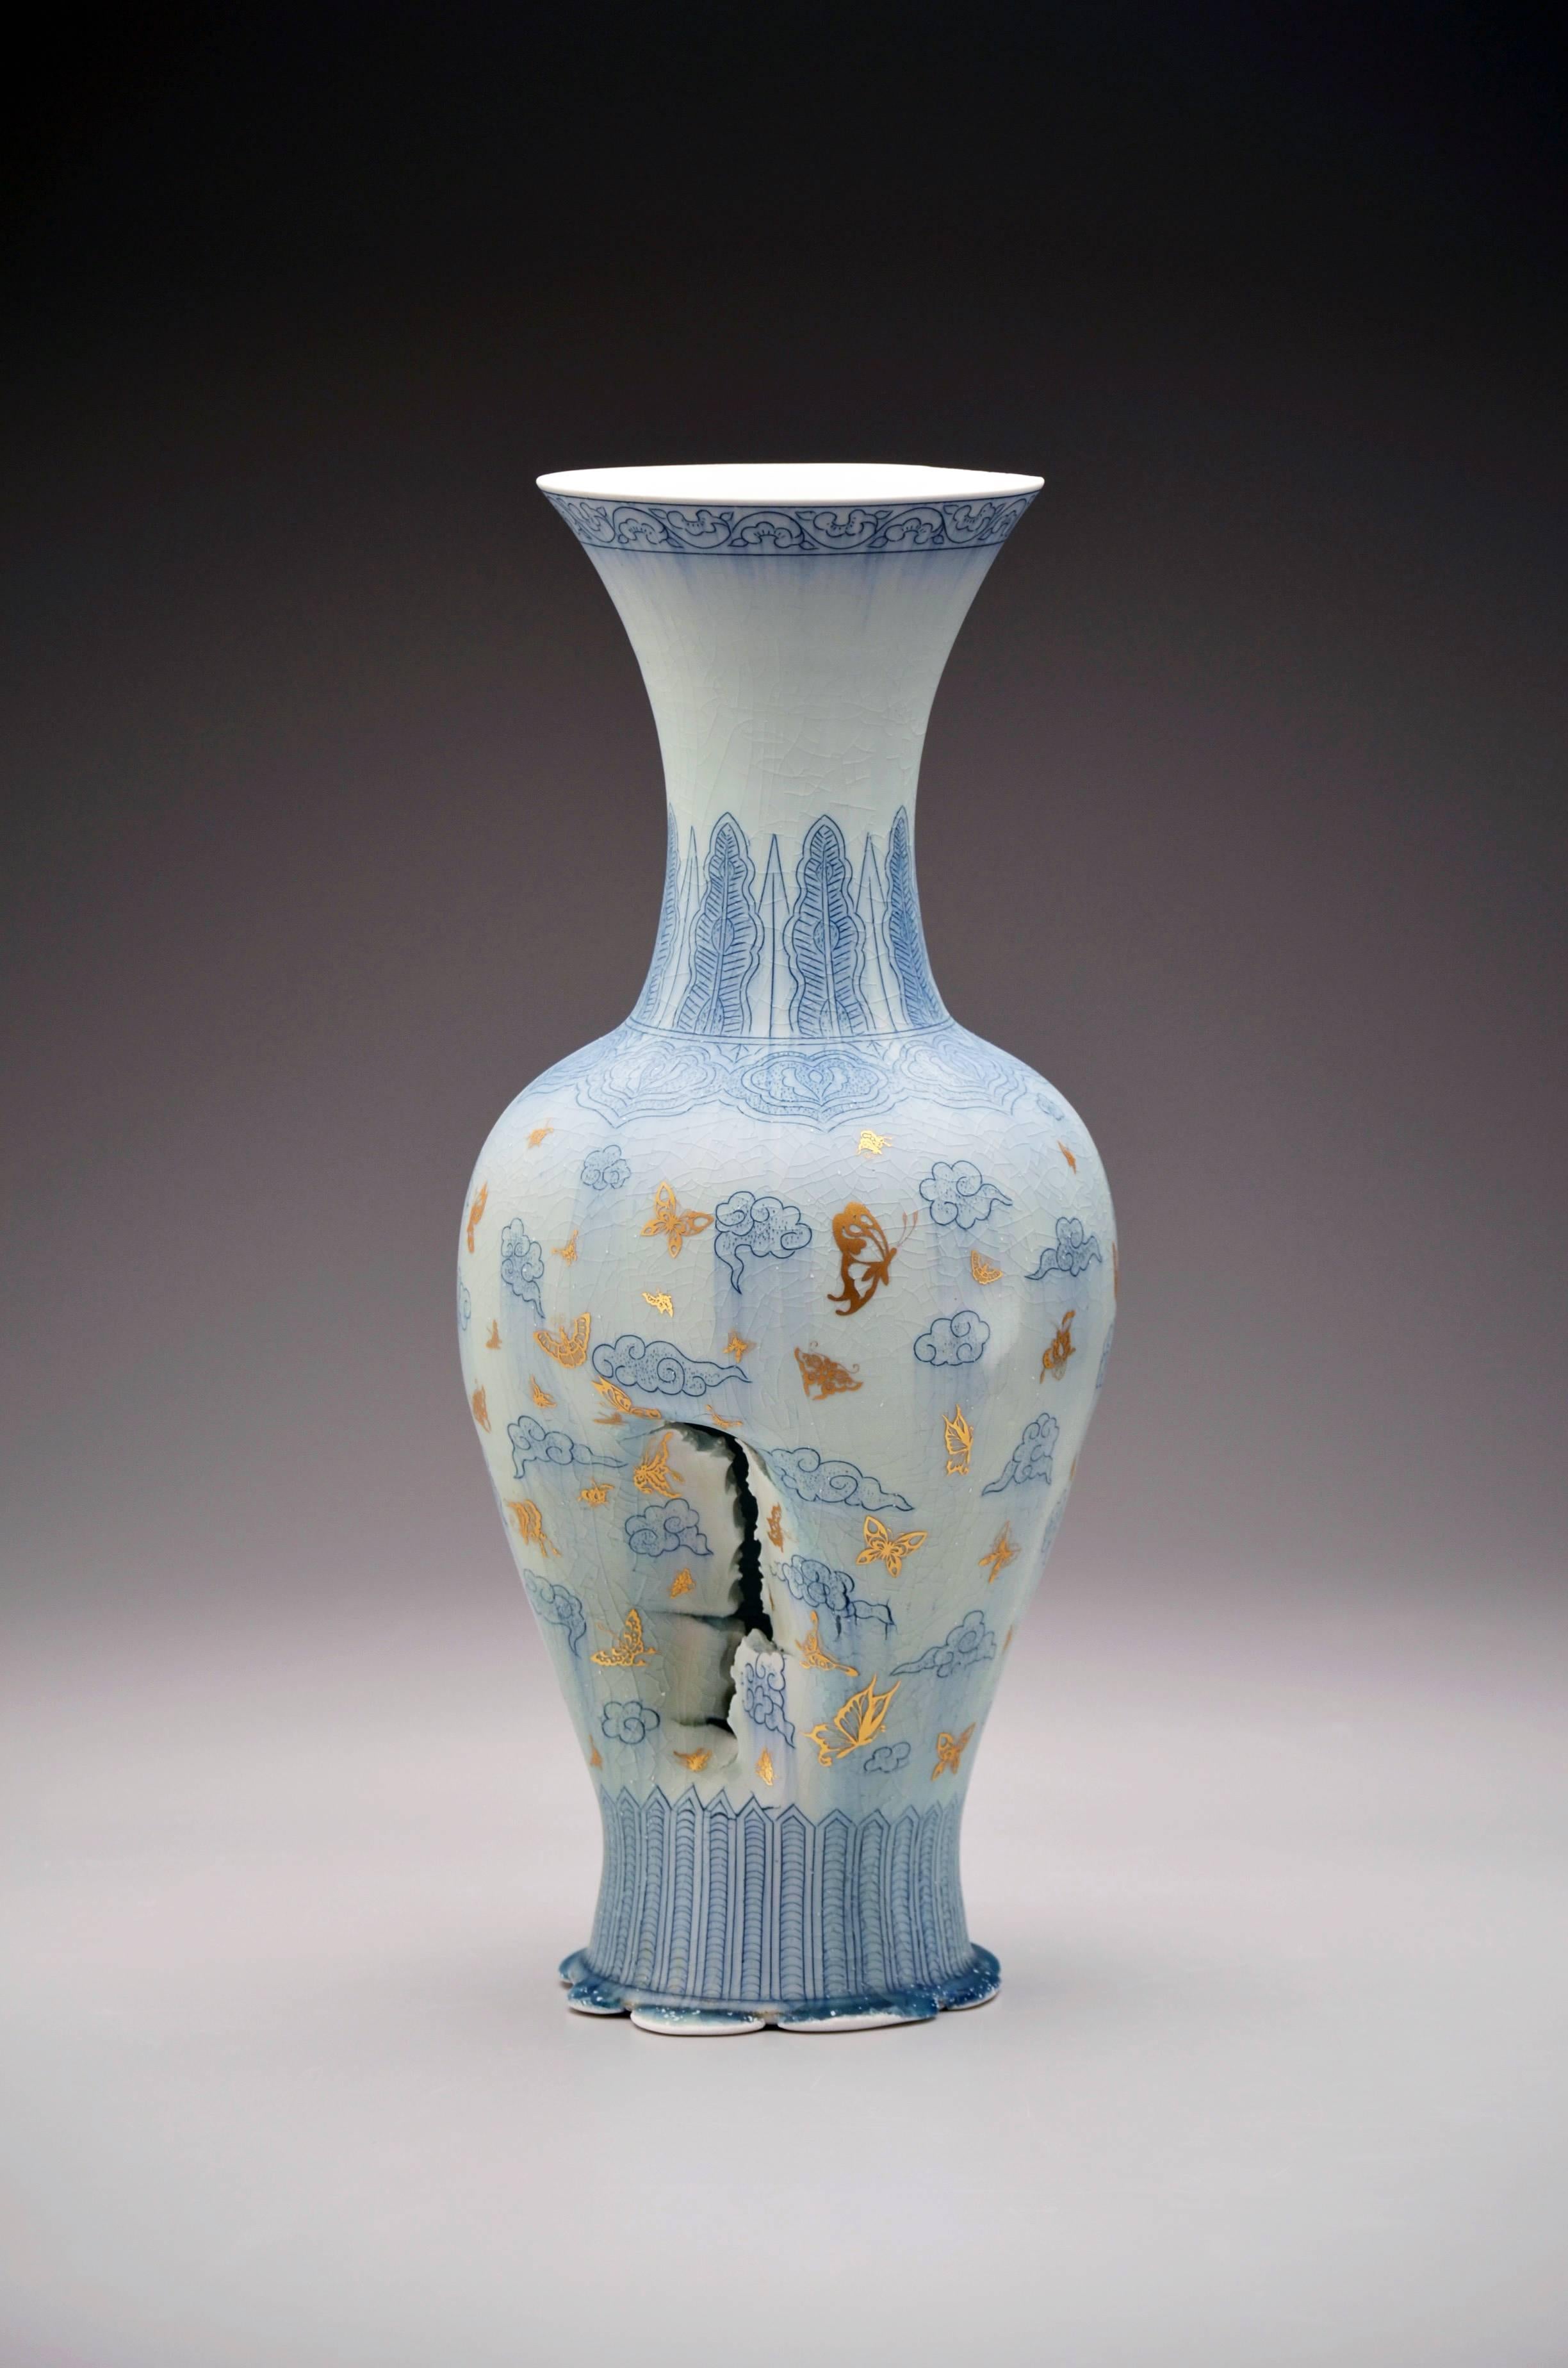 Vase with Clouds and Butterflies is another fantastic example of the marvelous work that Steven Young Lee produces.  Crafting traditional vessel forms flawlessly, Steven then deconstructs the piece, giving it a dramatic sculptural edge. 

22&quot;